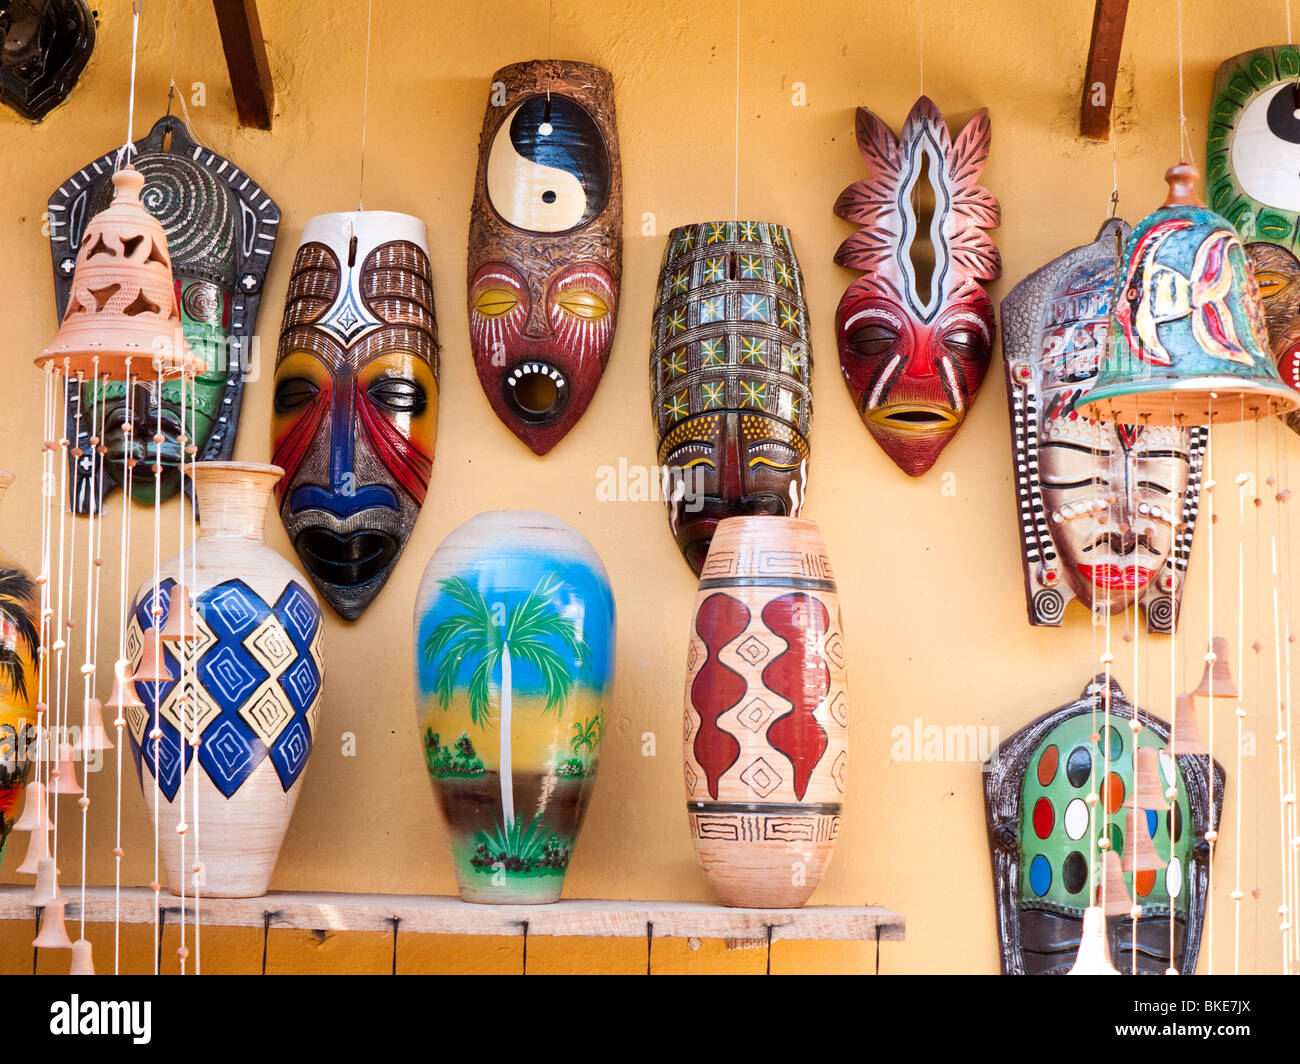 Afro Cuban masks and vases in Boutique in Trinidad Street, Cuba Stock Photo